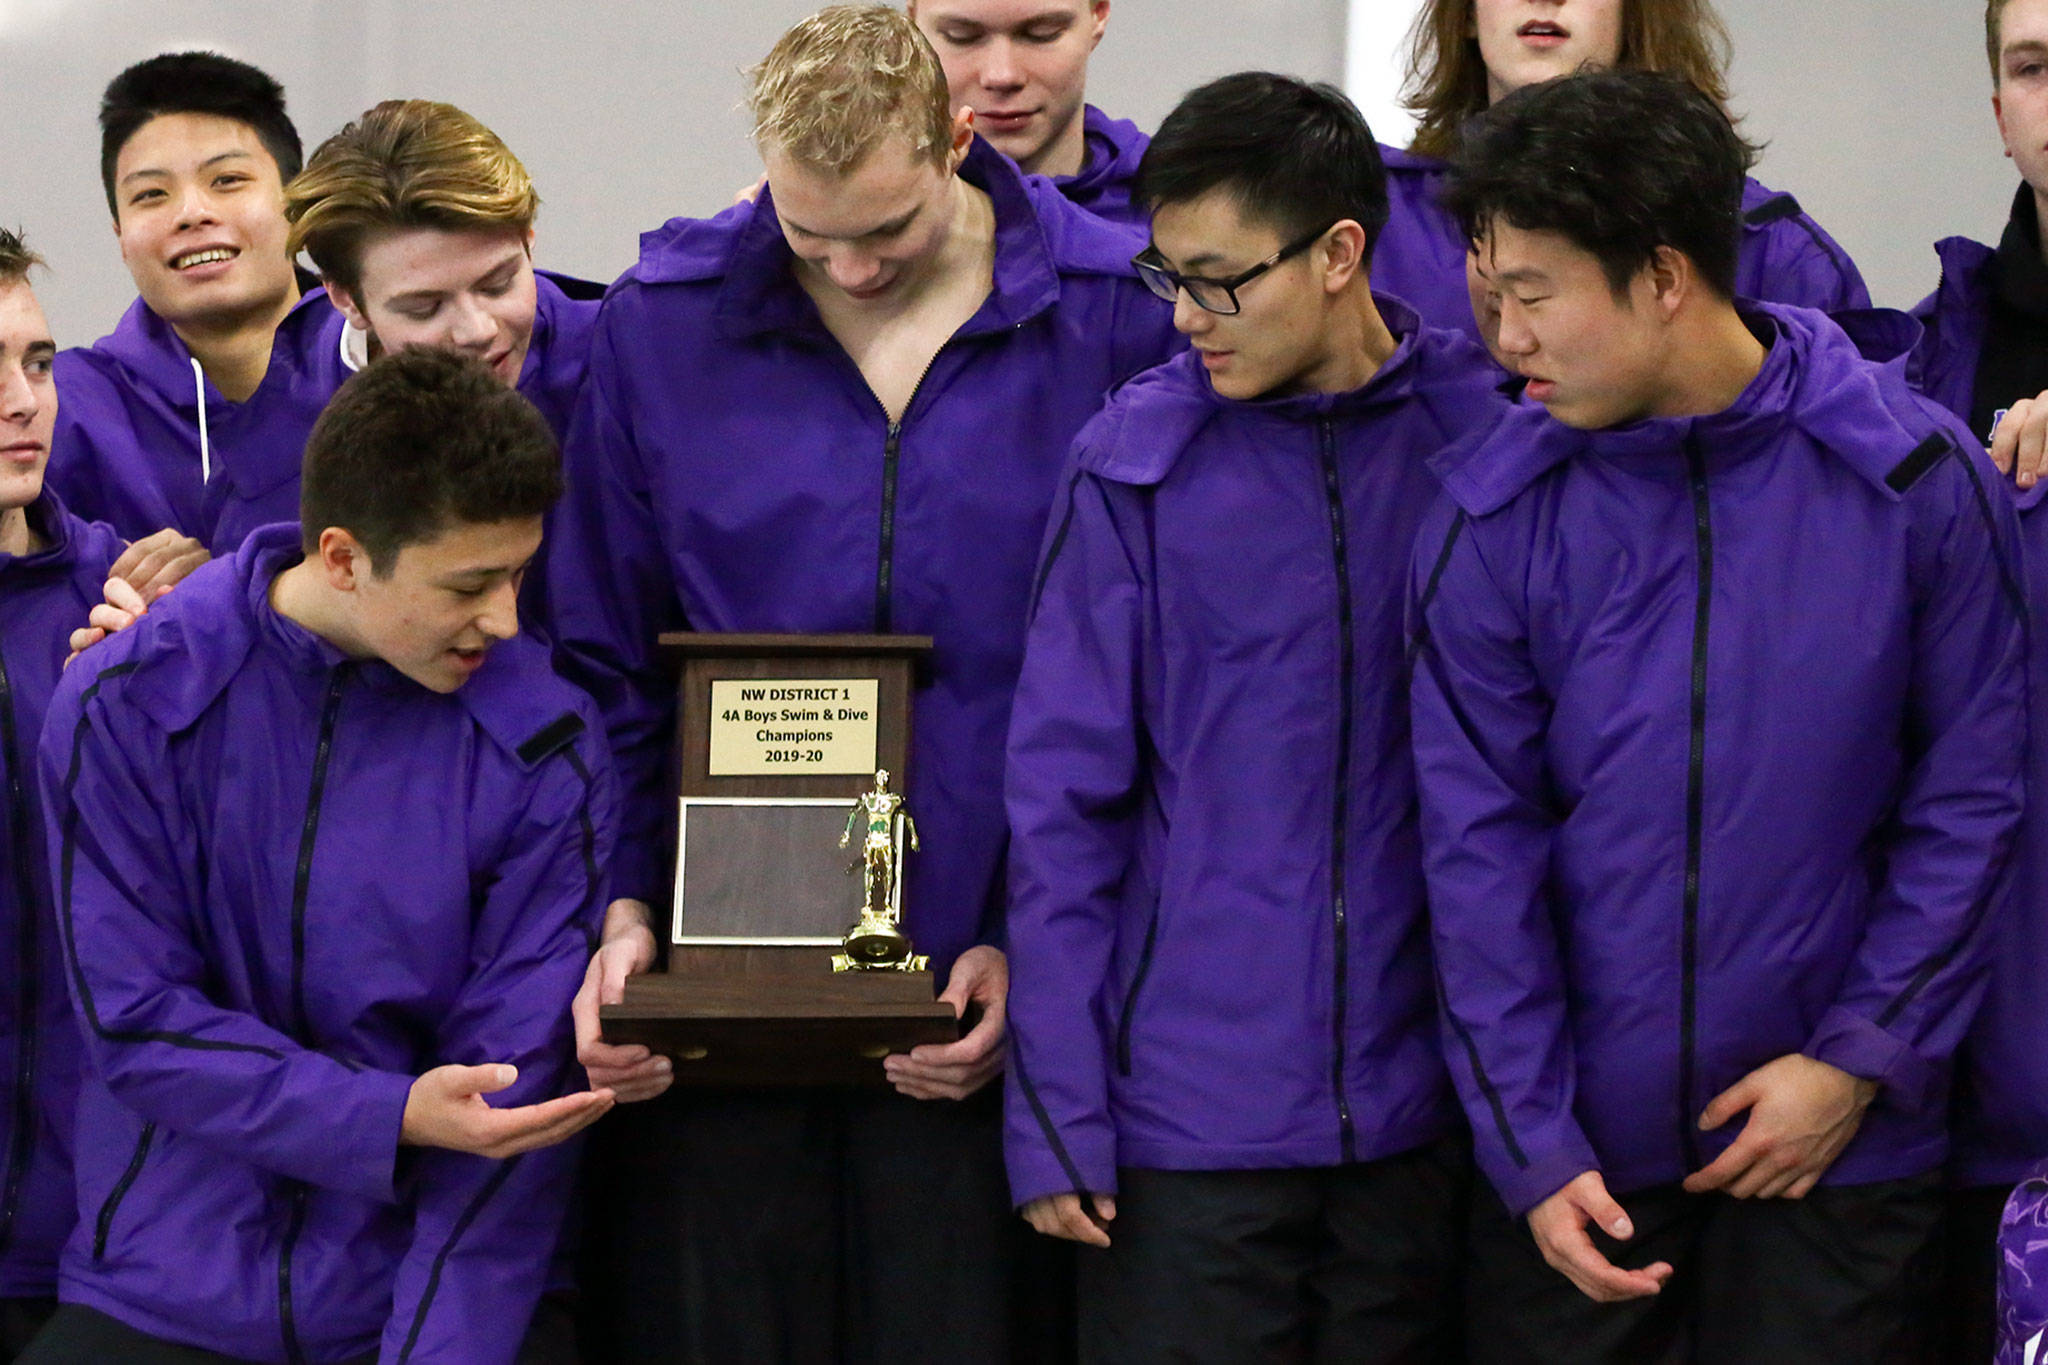 Kamiak swimmers pose with the team championship trophy at the end of the 4A Northwest District swim and dive finals Saturday at Snohomish Aquatic Center in Snohomish. Kamiak won its 11th team title in 13 years. (Kevin Clark / The Herald)